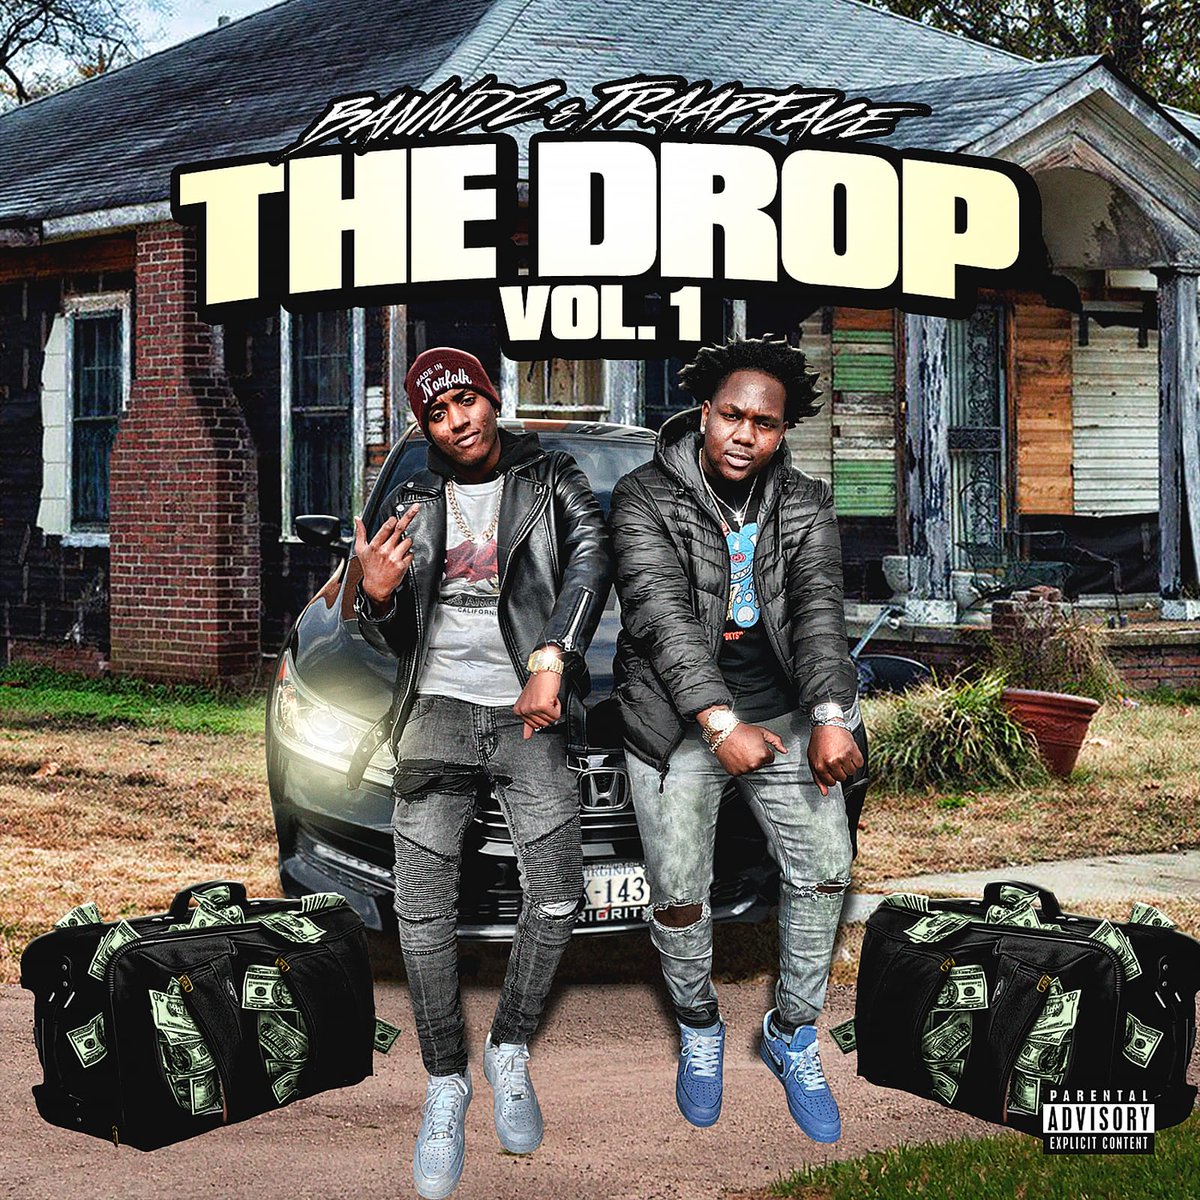 'The Drop' Vol. 1🏚💰 Banndz ft. Me is officially otw. Stay tuned for the date⏳. Once it's UP, it's STUCK 🗣🗣 @wwaavy1 💰 @lilkickxxs 🏚😈 (cover made by @mixtapecoverdesigner )